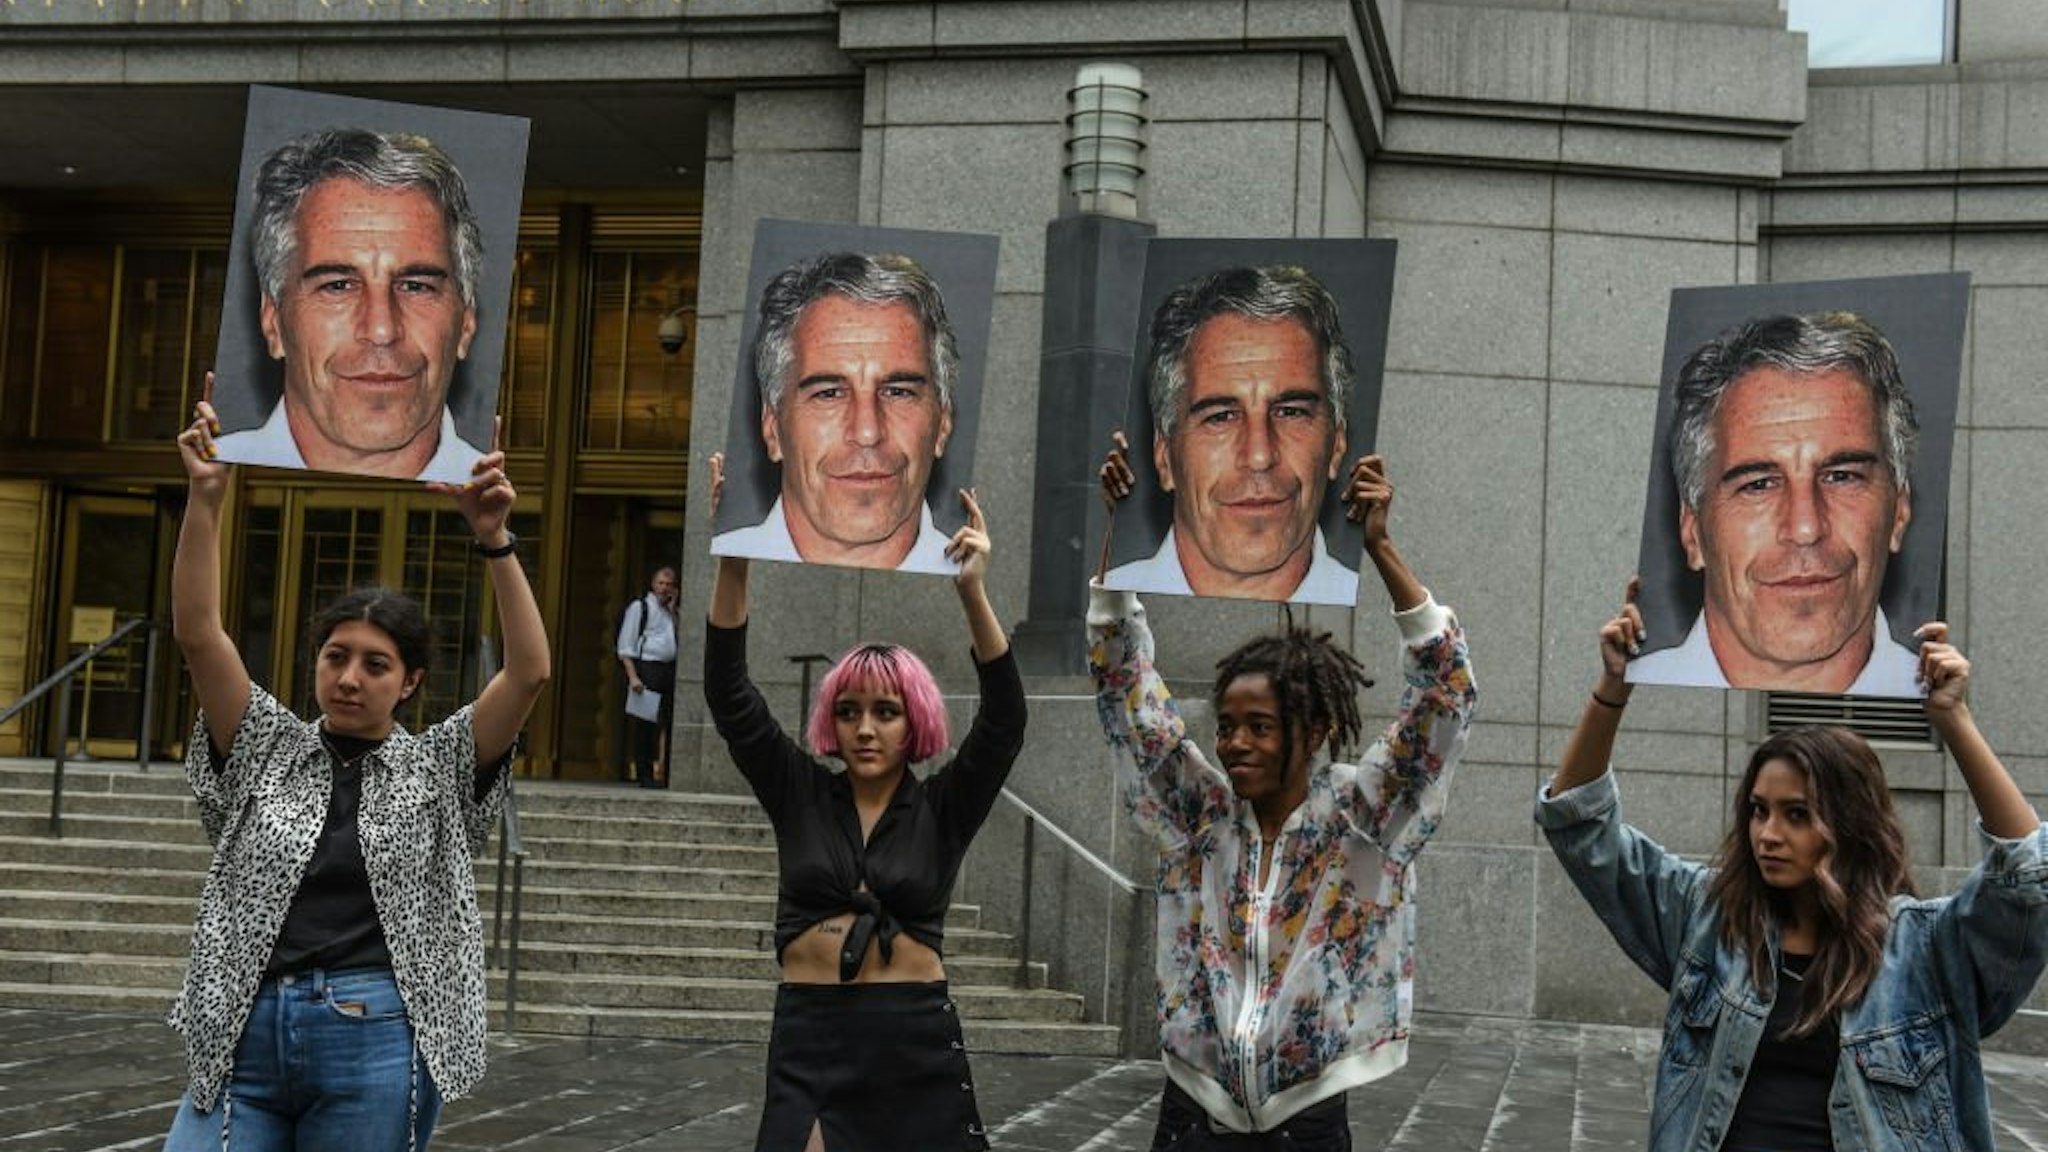 A protest group called "Hot Mess" hold up signs of Jeffrey Epstein in front of the Federal courthouse on July 8, 2019 in New York City.